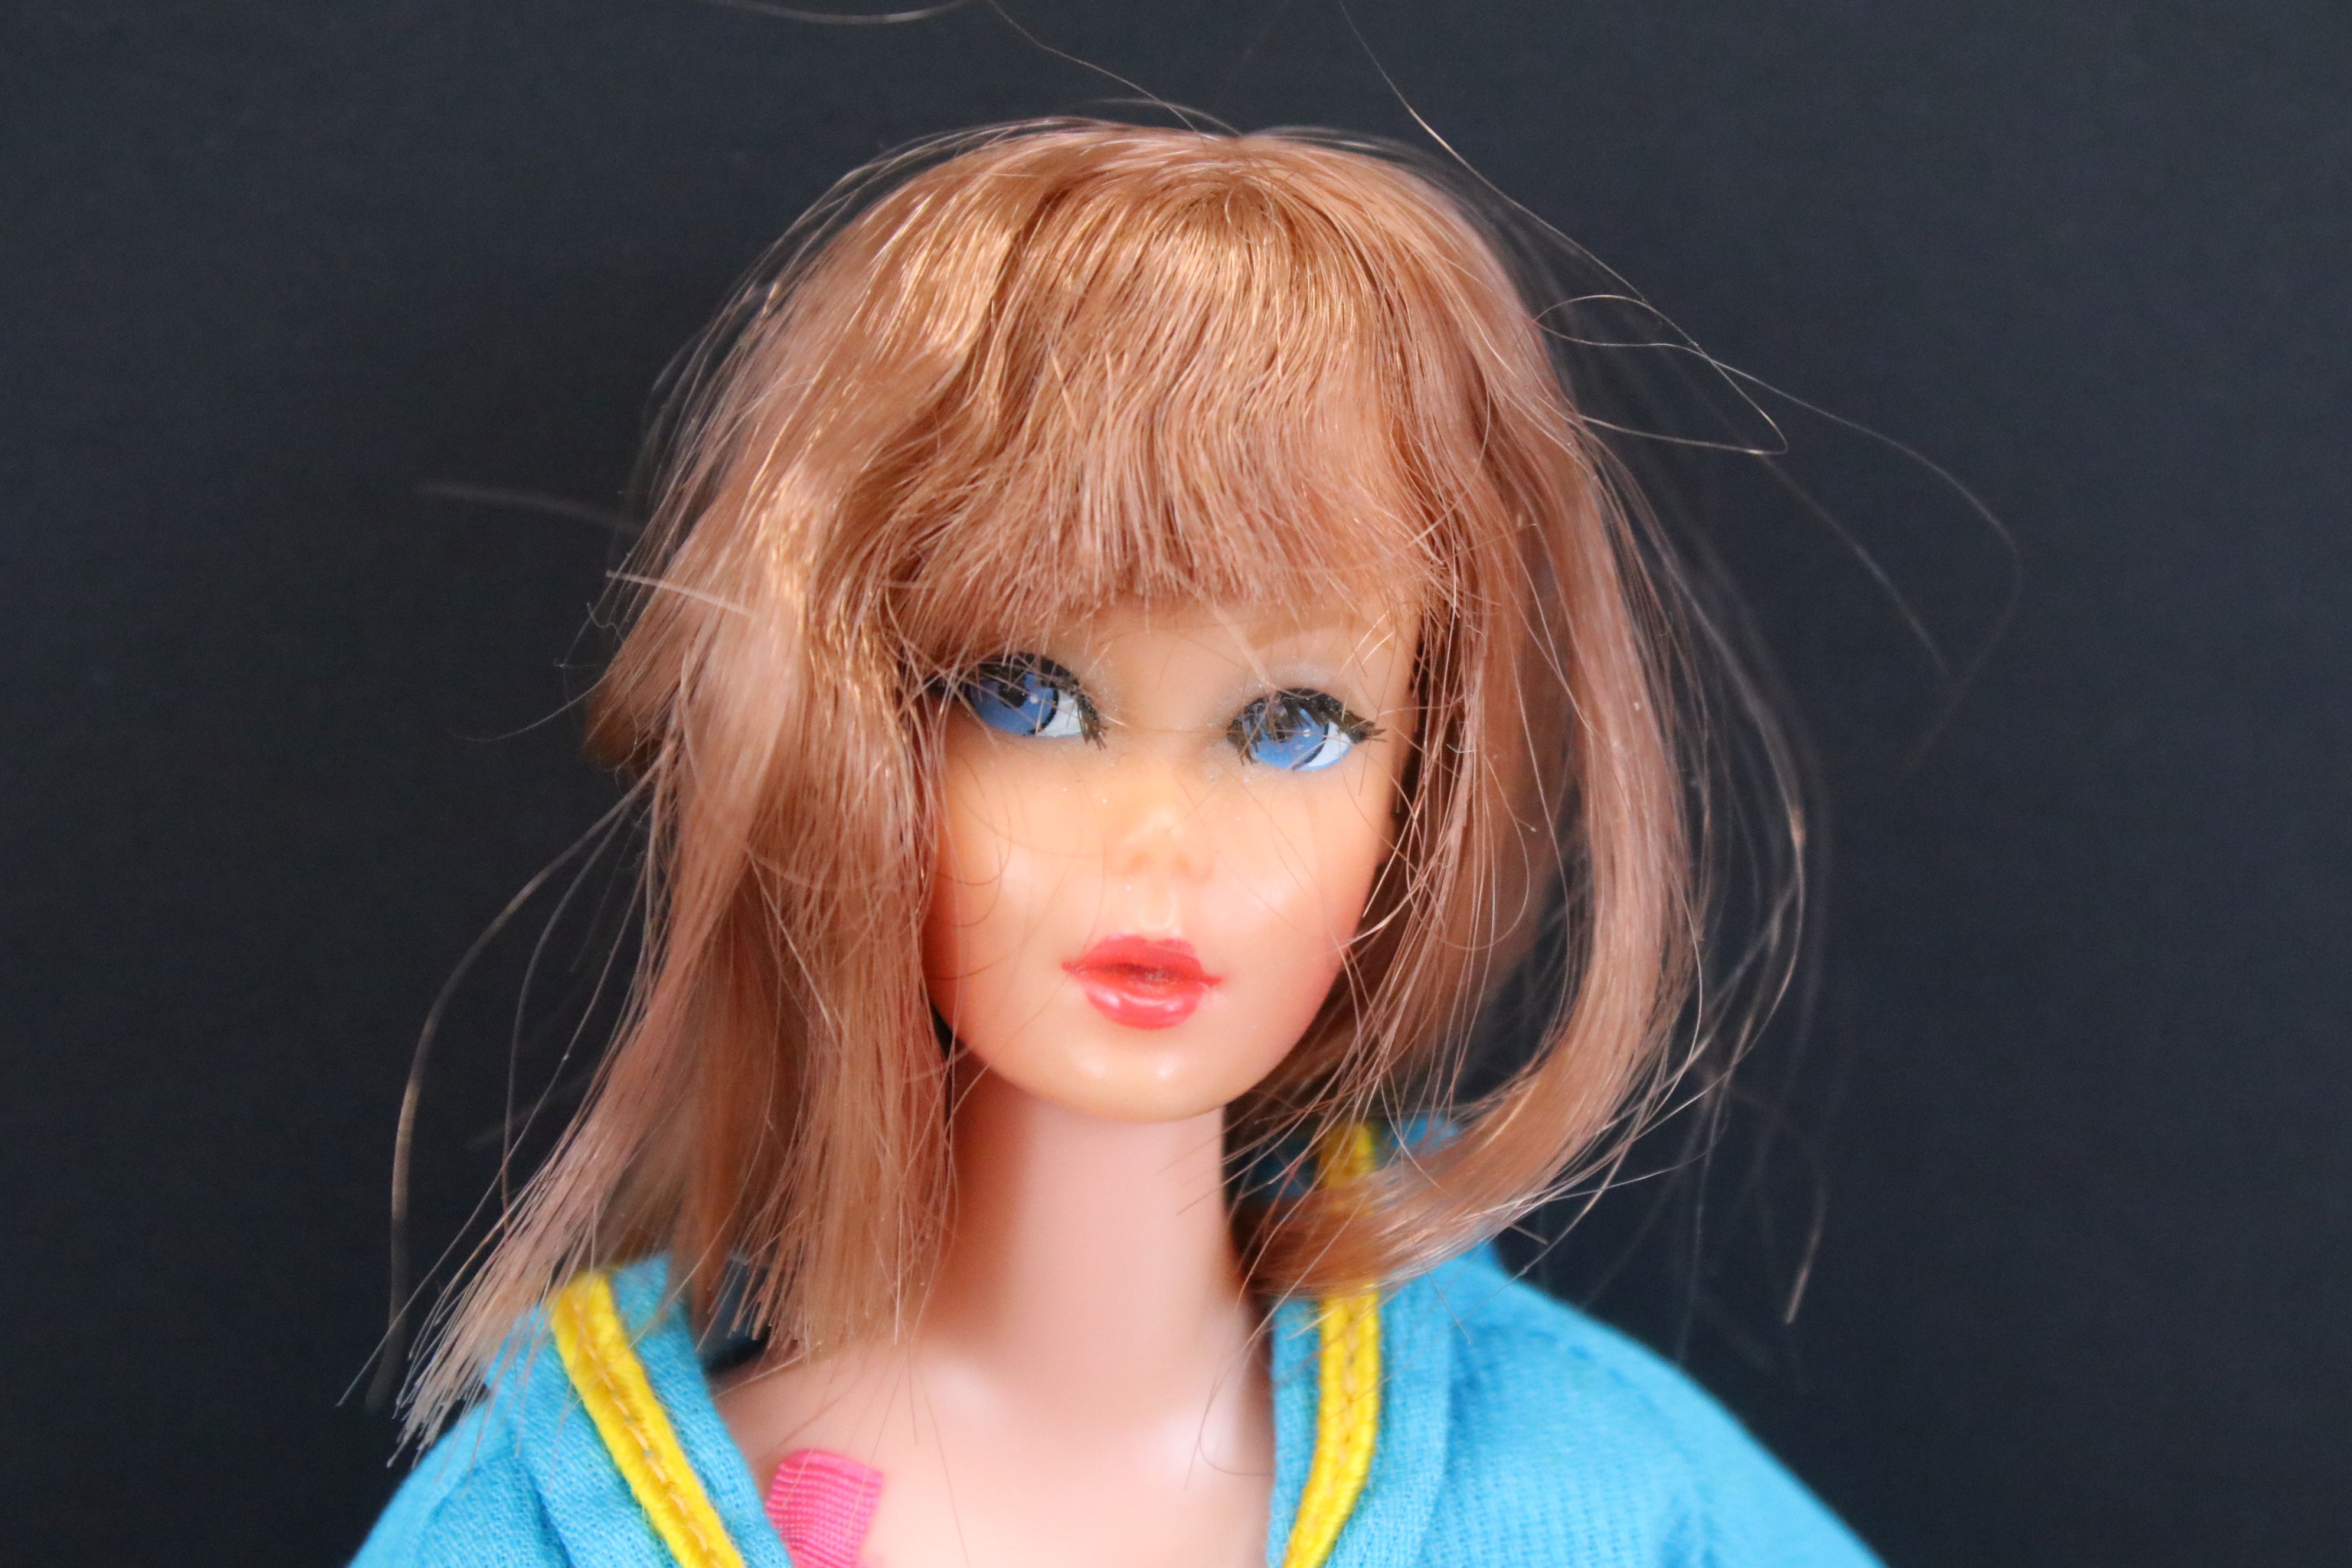 Collection of Barbie dolls and accessories to include 1 x Barbie doll in blue dress with auburn hair - Image 2 of 7